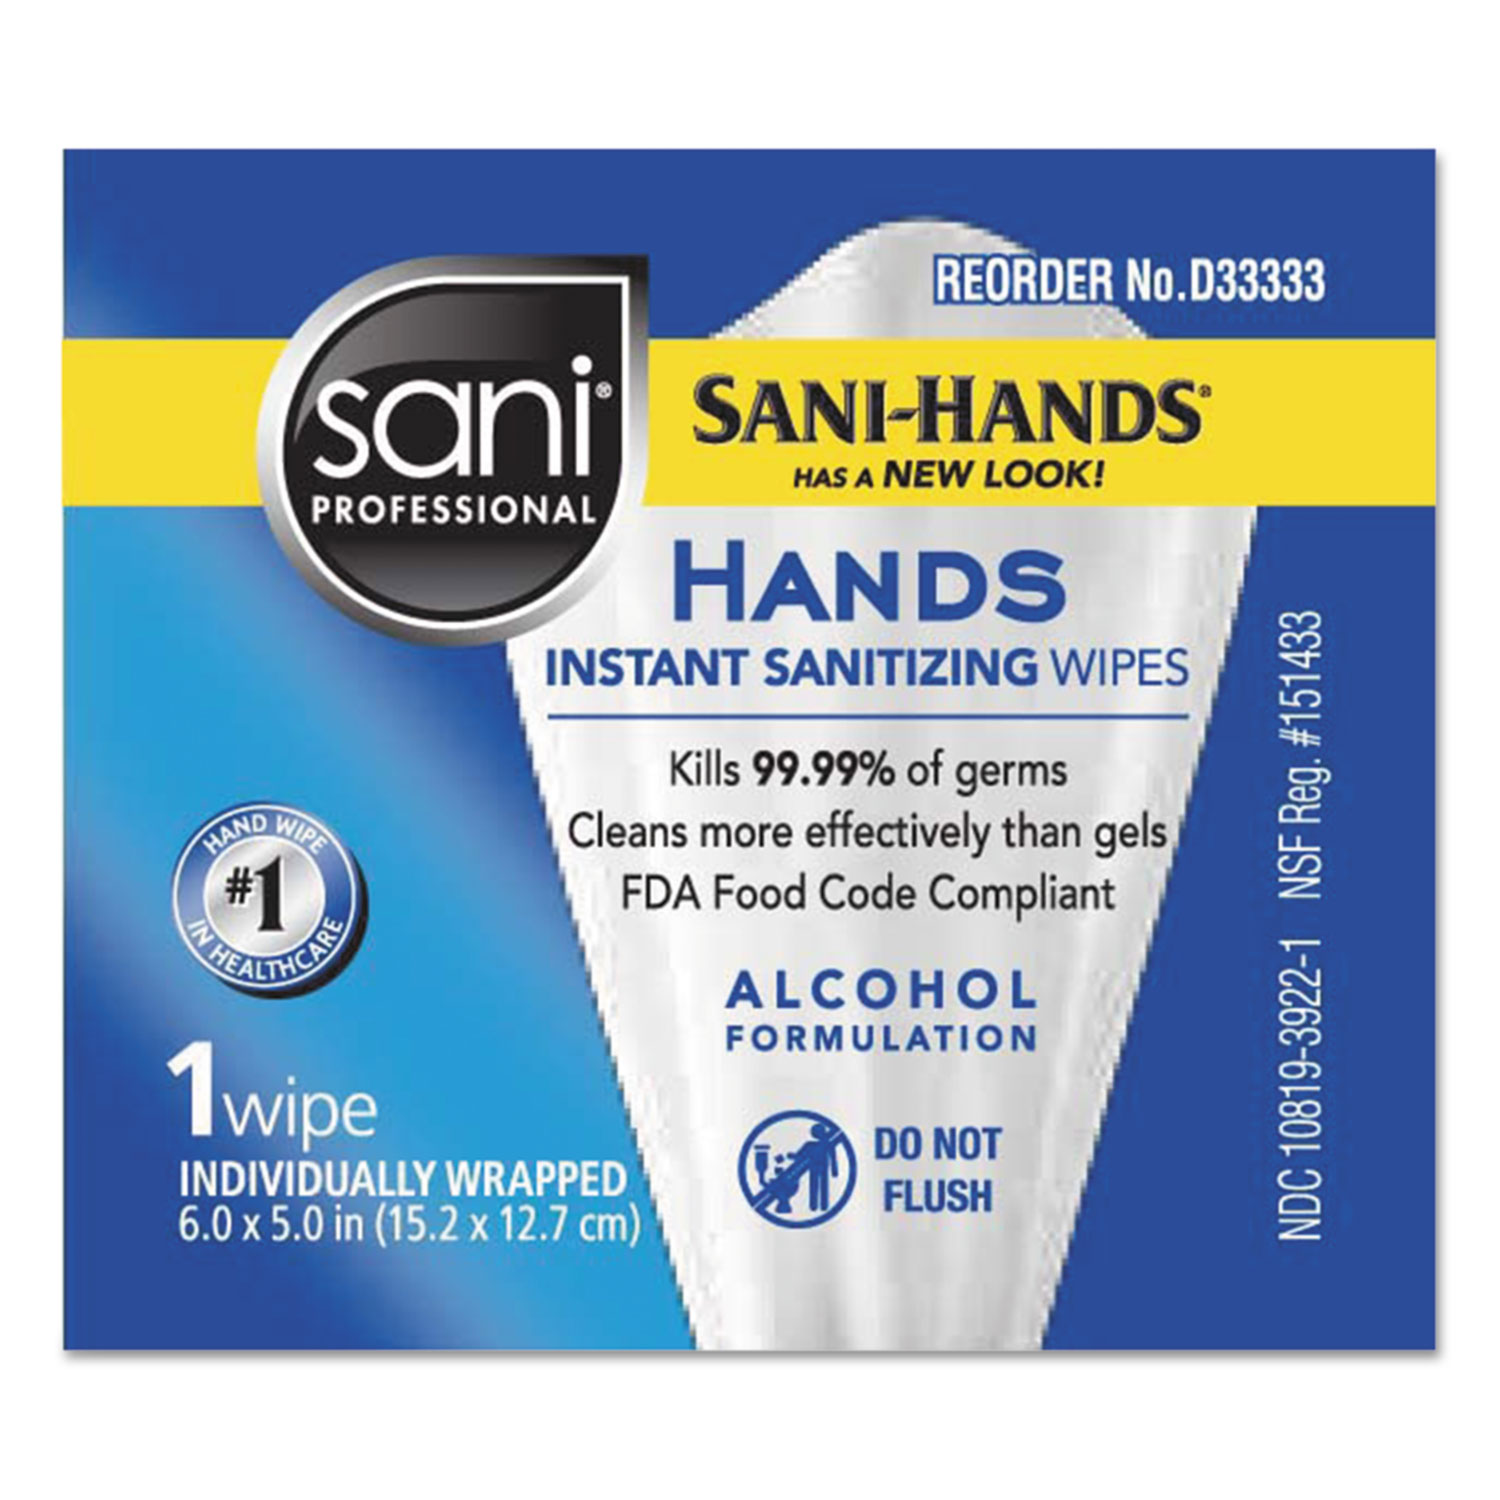 Sani-Hands Hands Instant Sanitizing Wipes, White, 5 x 7 3/4, 3000 Packets/Carton